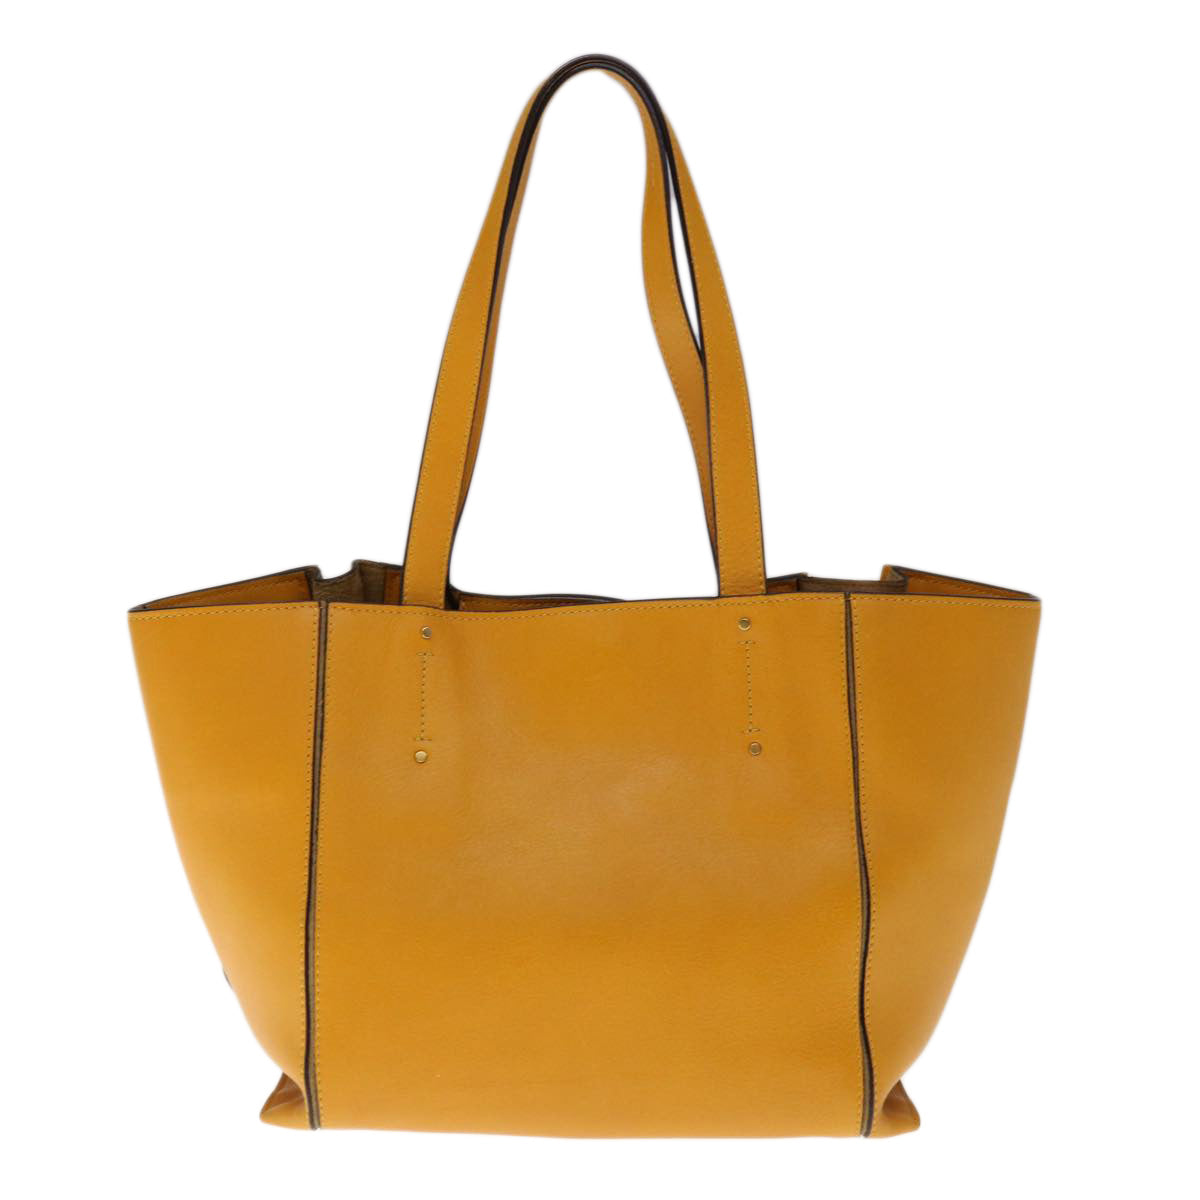 Chloe Tote Bag Leather Yellow Auth 65259 - 0